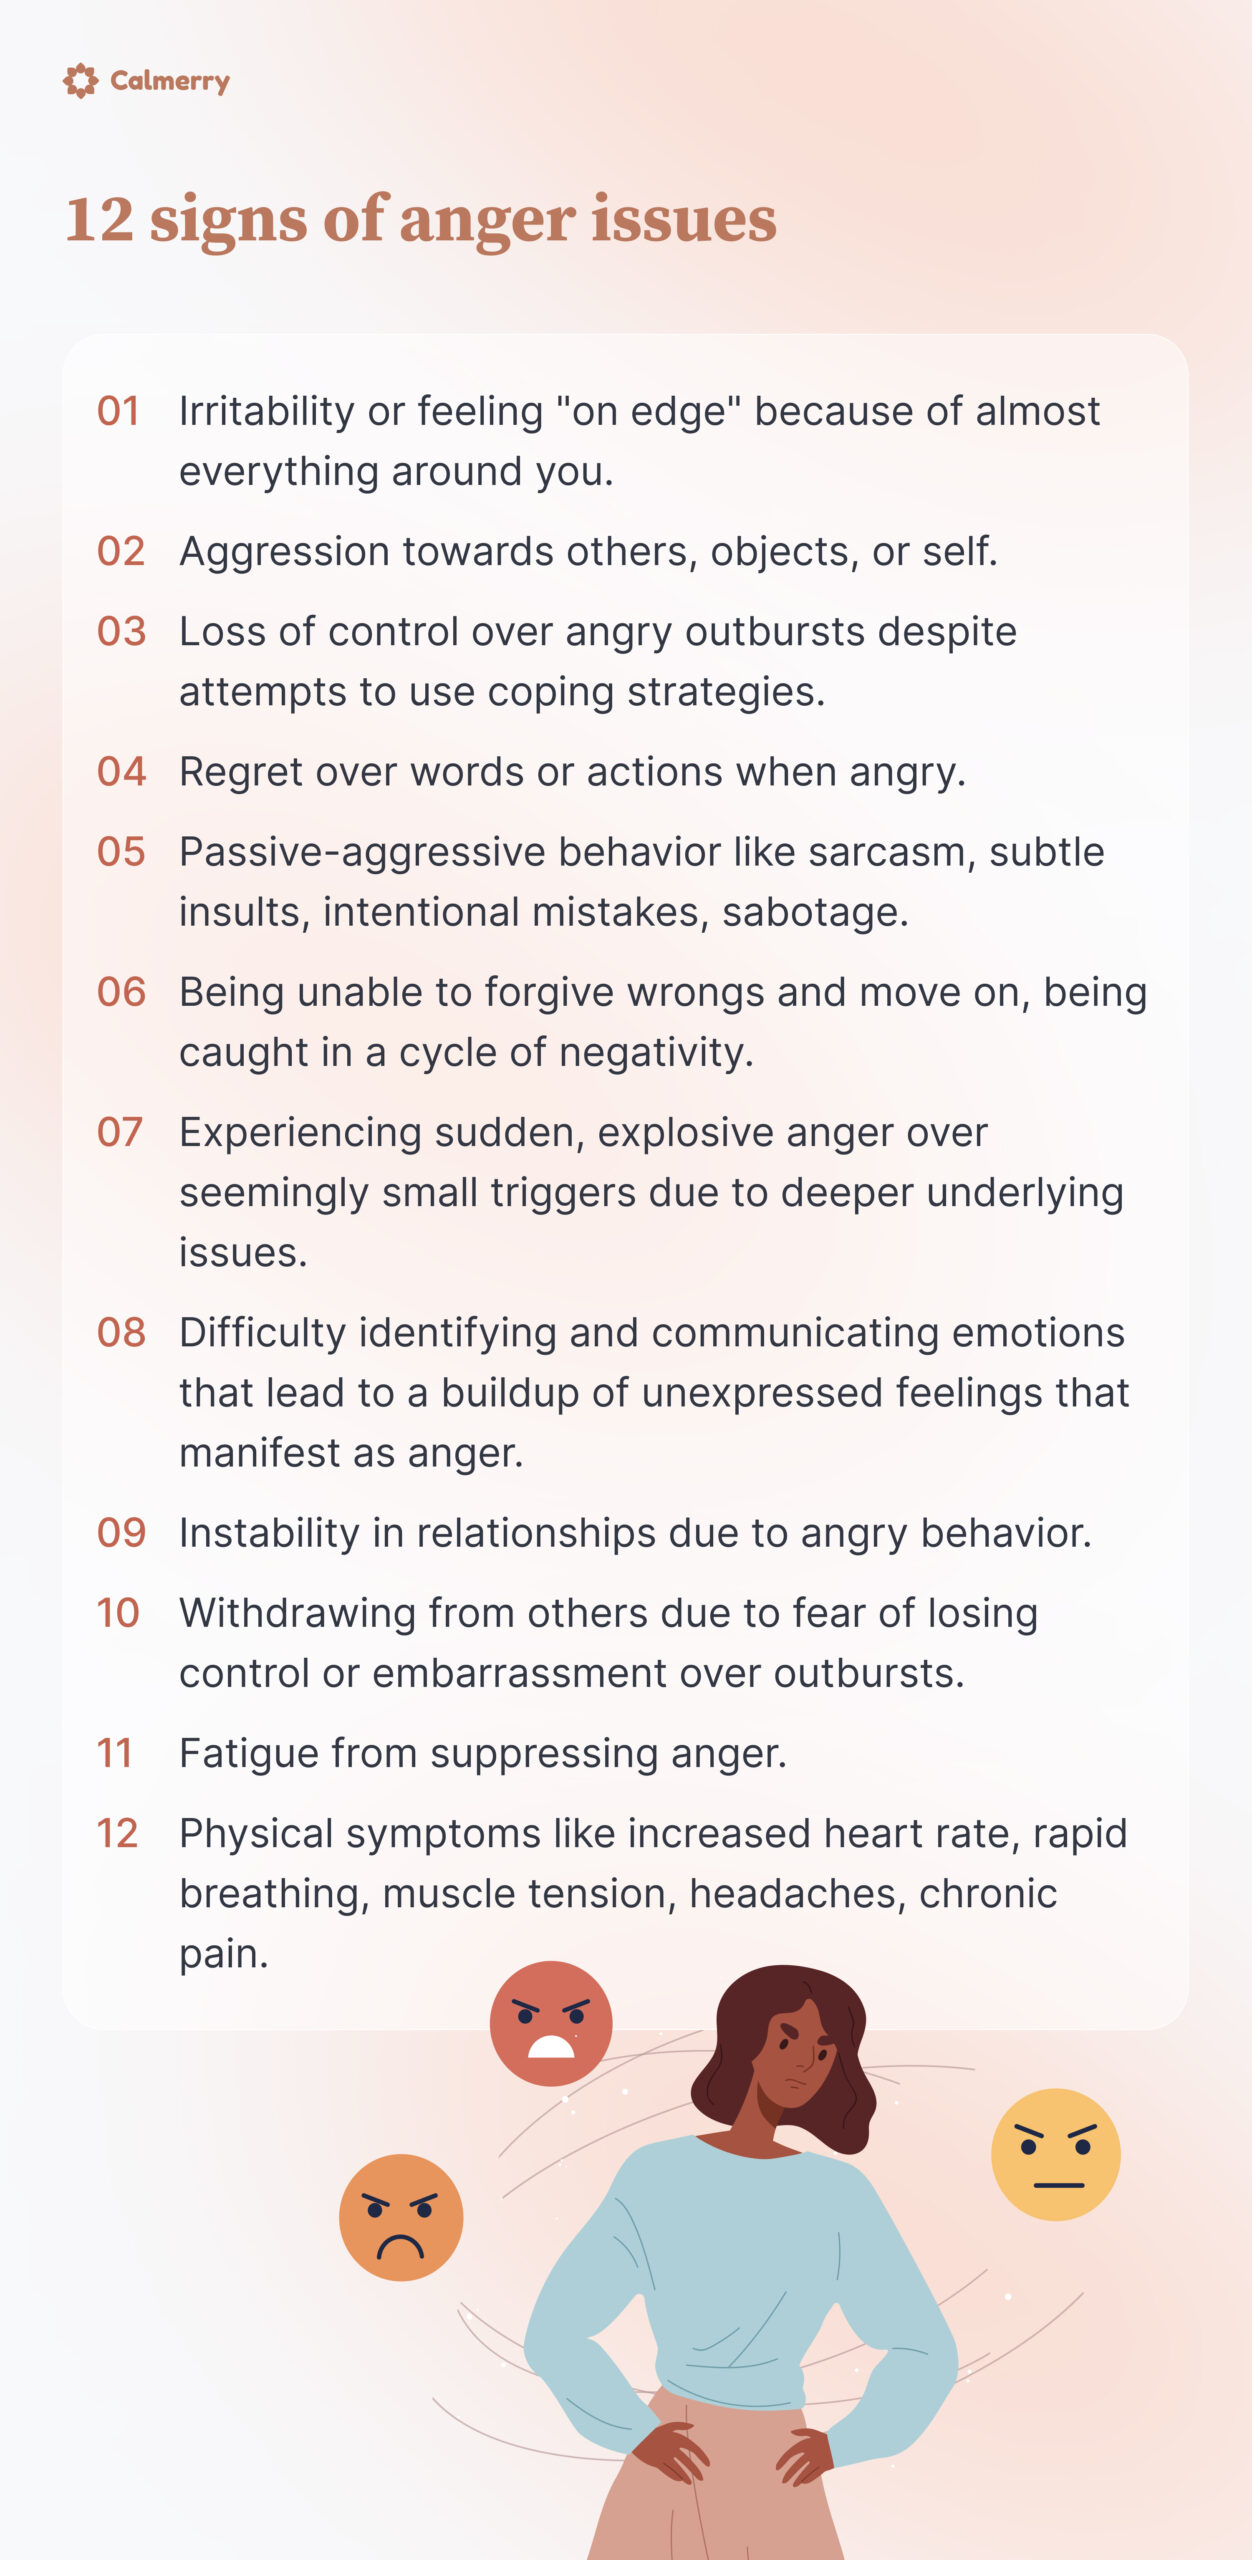 12 signs of anger issues
Irritability or feeling "on edge" because of almost everything around you.
Aggression towards others, objects, or self. 
Loss of control over angry outbursts despite attempts to use coping strategies.
Regret over words or actions when angry. 
Passive-aggressive behavior like sarcasm, subtle insults, intentional mistakes, sabotage.
Being unable to forgive wrongs and move on, being caught in a cycle of negativity.
Experiencing sudden, explosive anger over seemingly small triggers due to deeper underlying issues.
Difficulty identifying and communicating emotions that lead to a buildup of unexpressed feelings that manifest as anger.
Instability in relationships due to angry behavior 
Withdrawing from others due to fear of losing control or embarrassment over outbursts.
Fatigue from suppressing anger.
Physical symptoms like increased heart rate, rapid breathing, muscle tension, headaches, chronic pain.